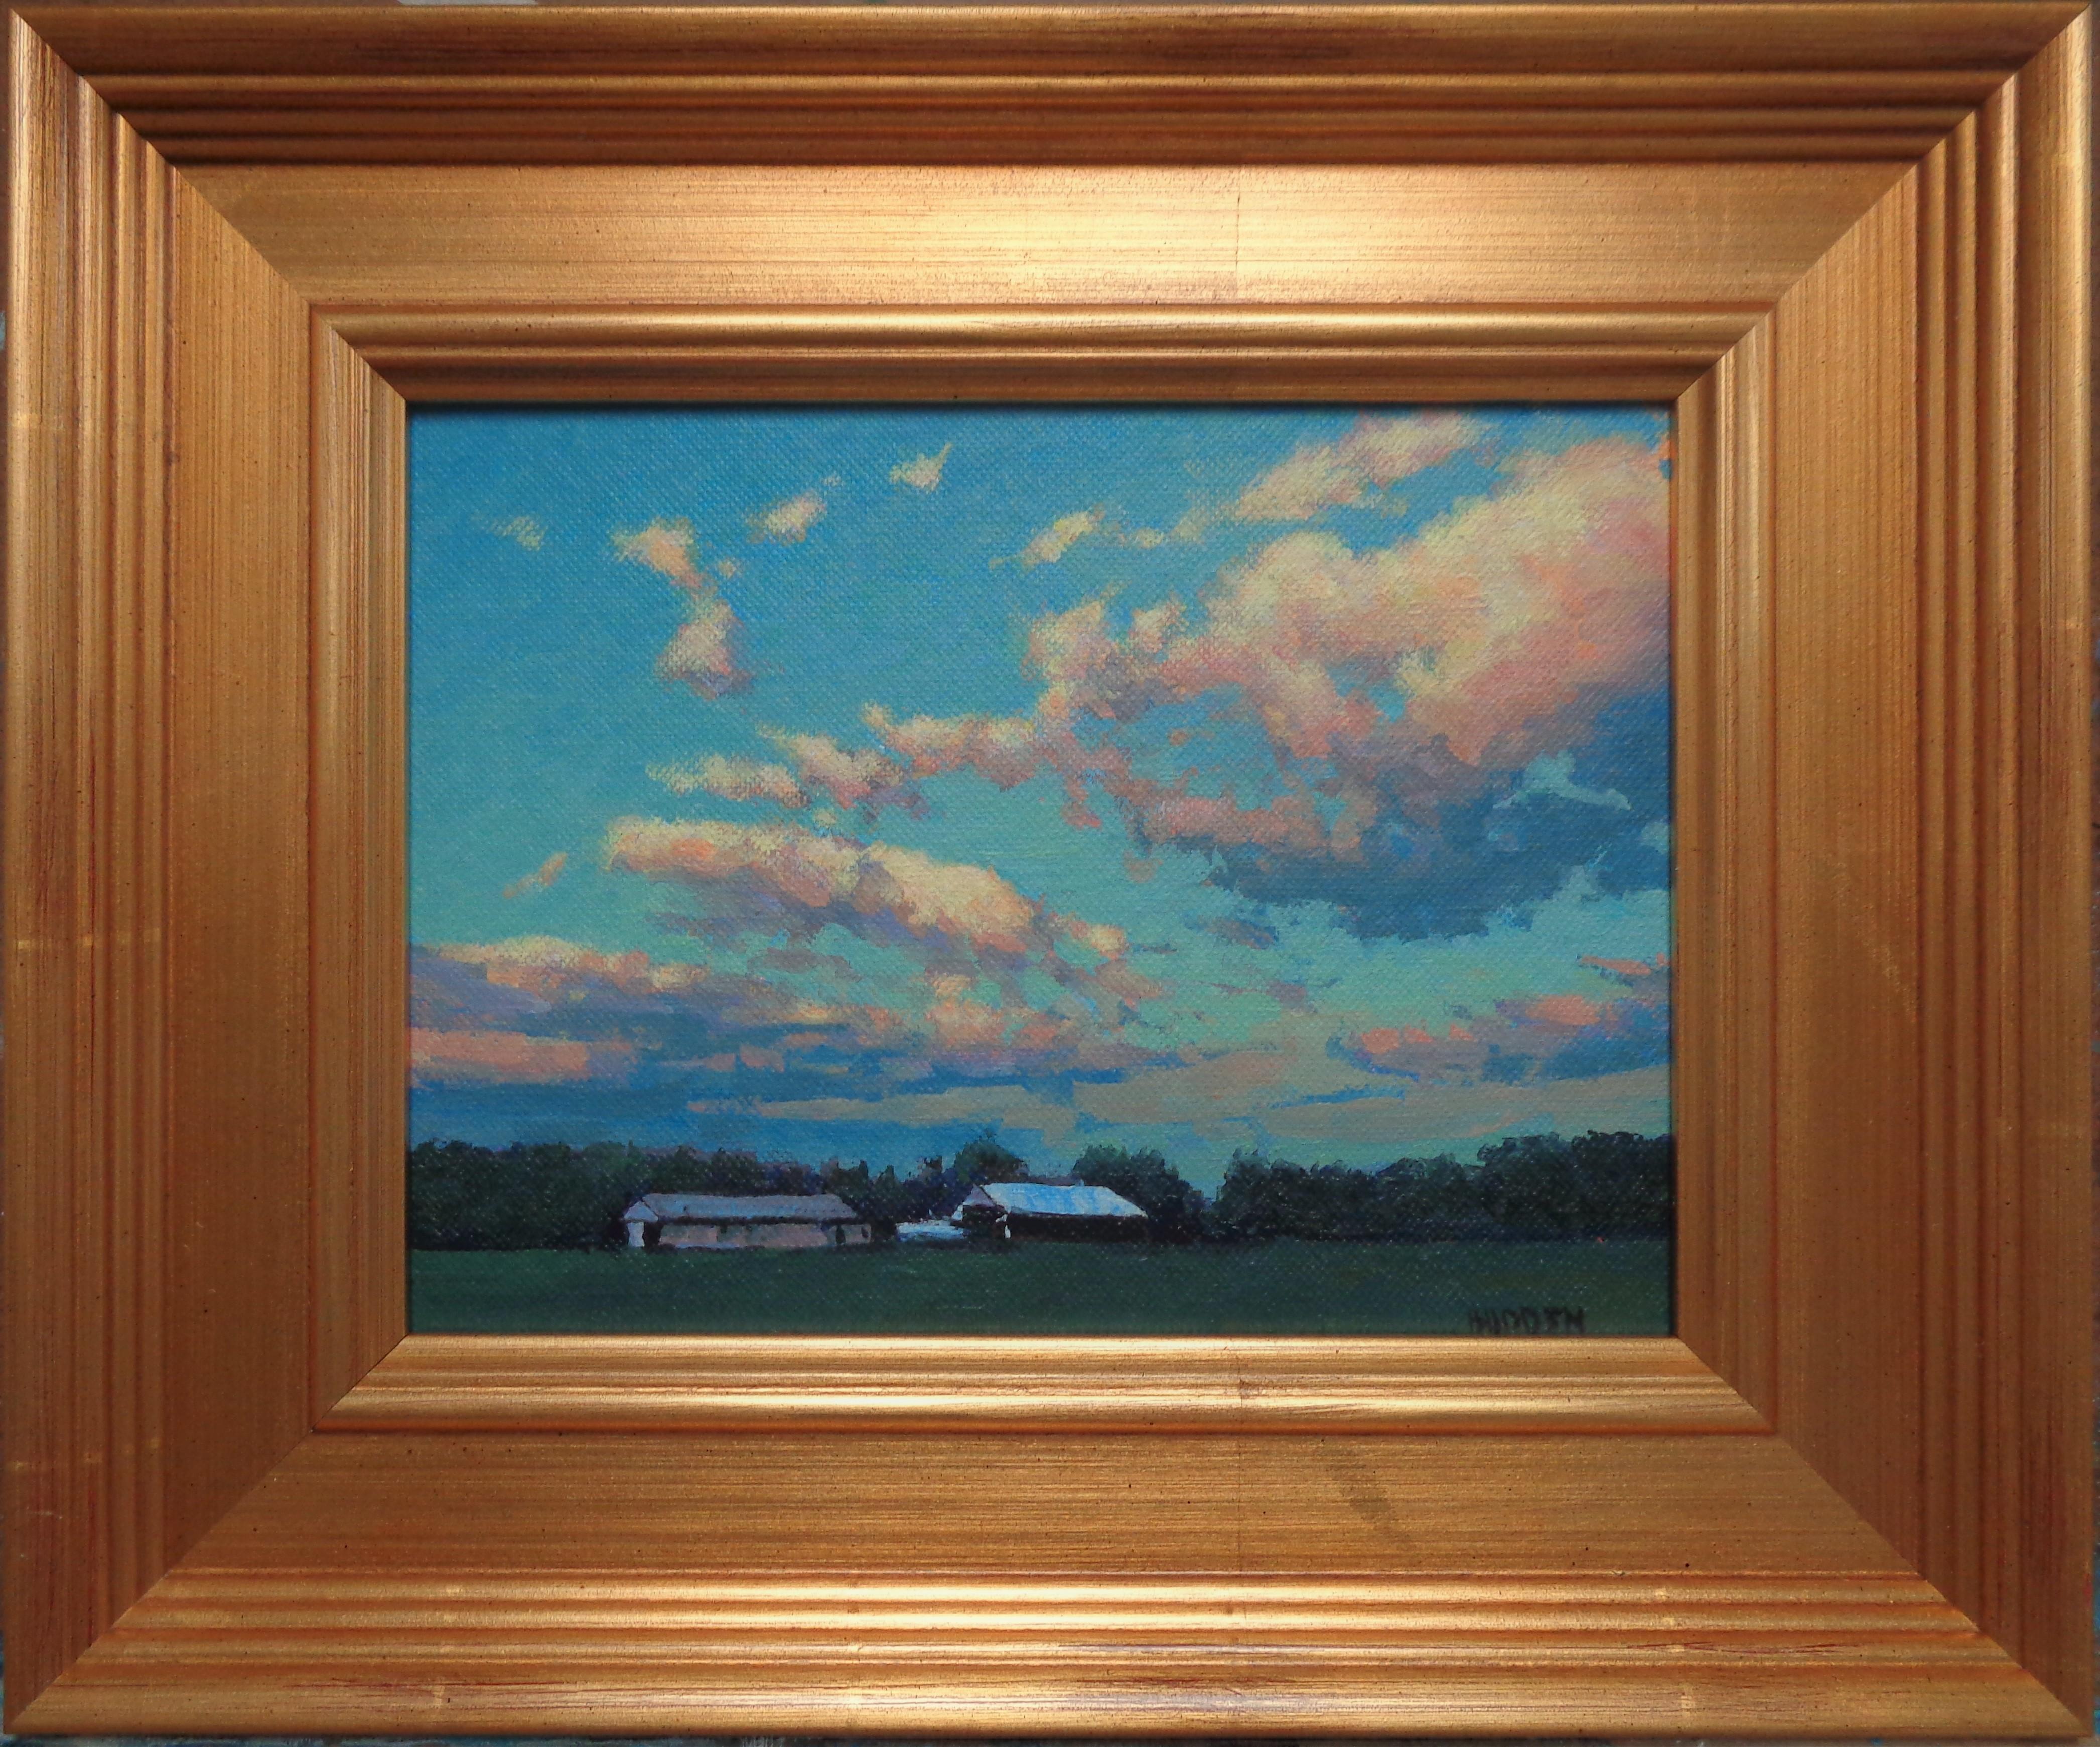 Afternoon Sky is an oil on panel painting just completed in the studio. The painting exudes the rich qualities of oil paint with bright strong color, a variety of lost and found edges, visible brush work and a concentration on a beautiful quality of